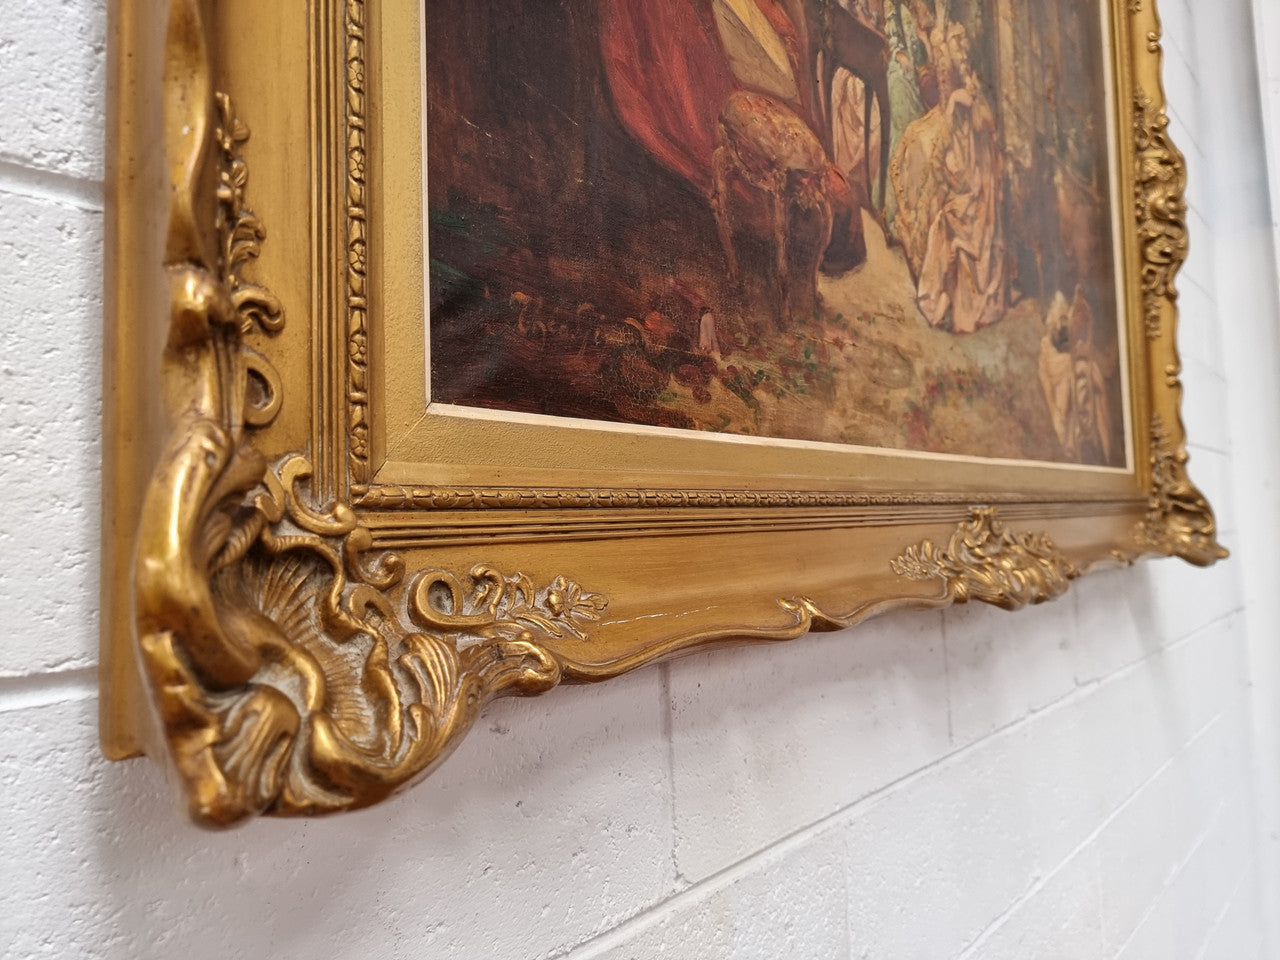 Beautifully framed oil on canvas, sourced in France is this stunning painting in an ornate decorative frame and in good condition.